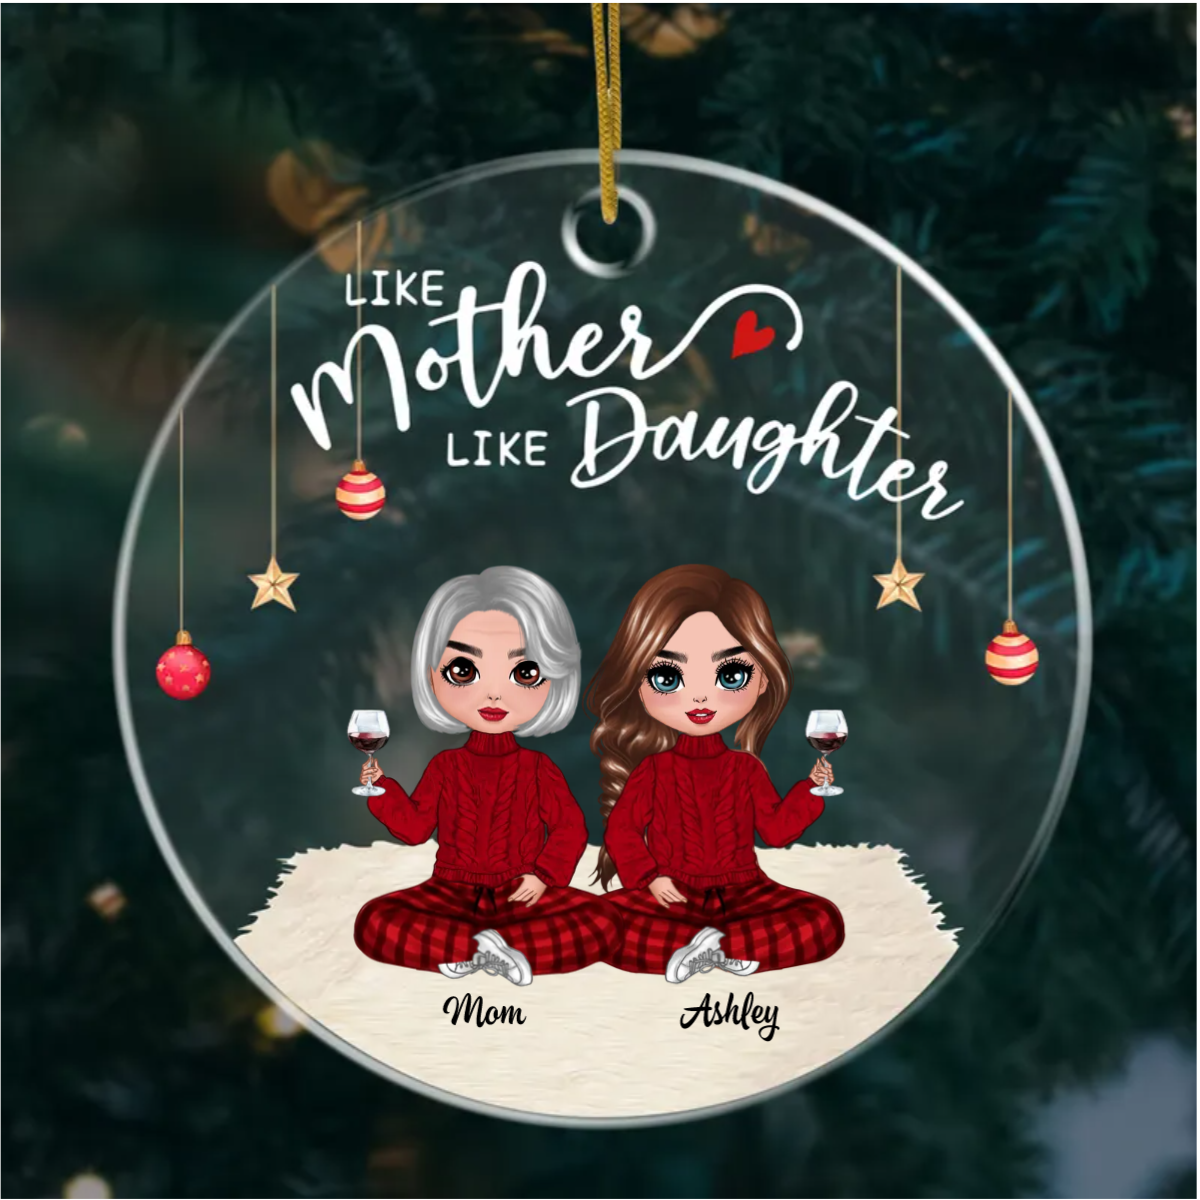 Like Mother Like Daughter Ornament - Custom Christmas Mom and Daughter Ornament